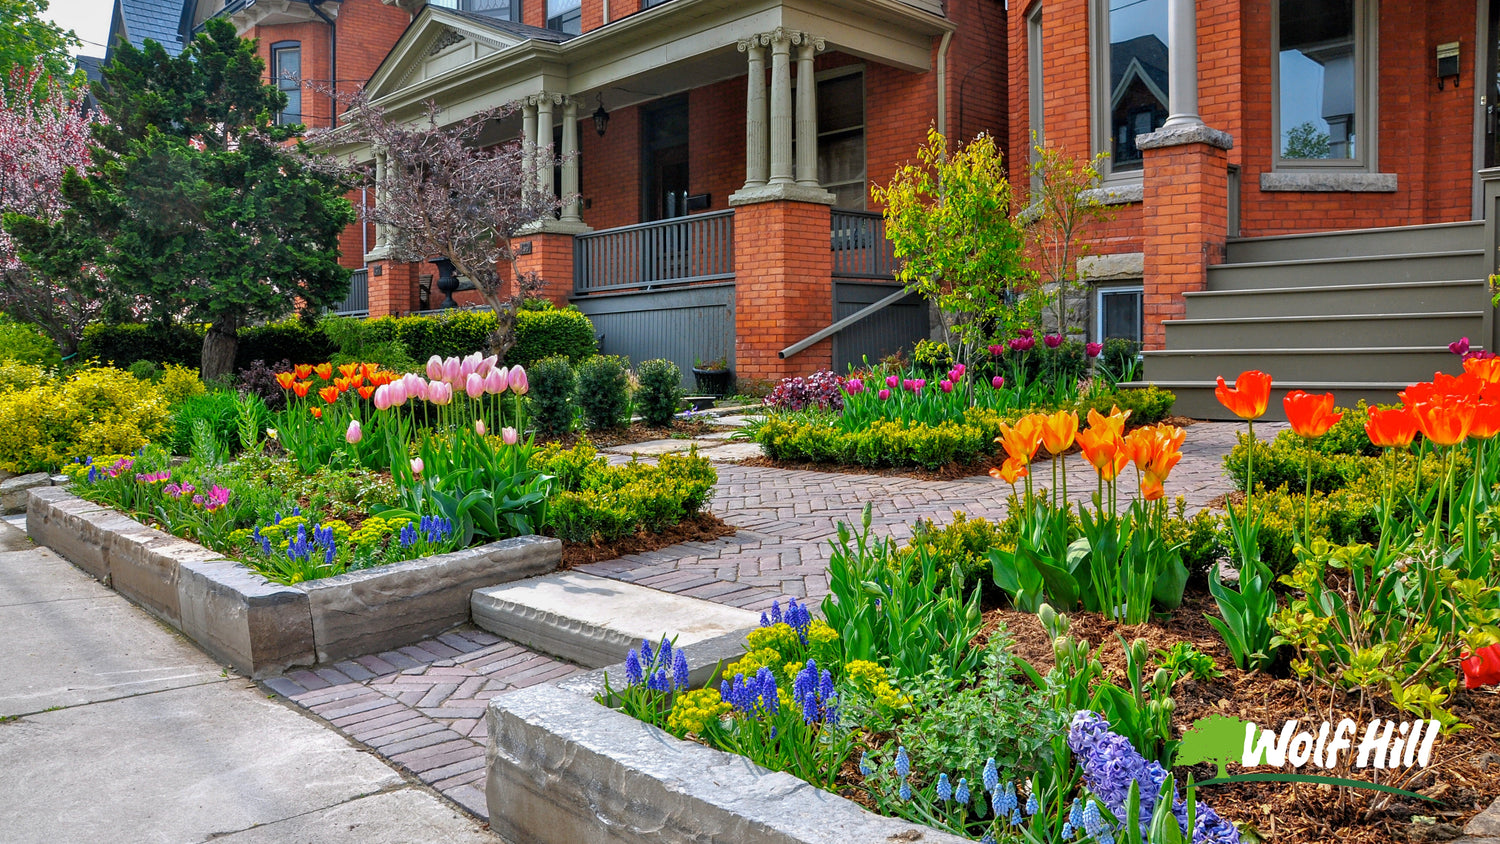 Landscaping for Curb Appeal: Ideas and Tips from Wolf Hill Garden Center Pros